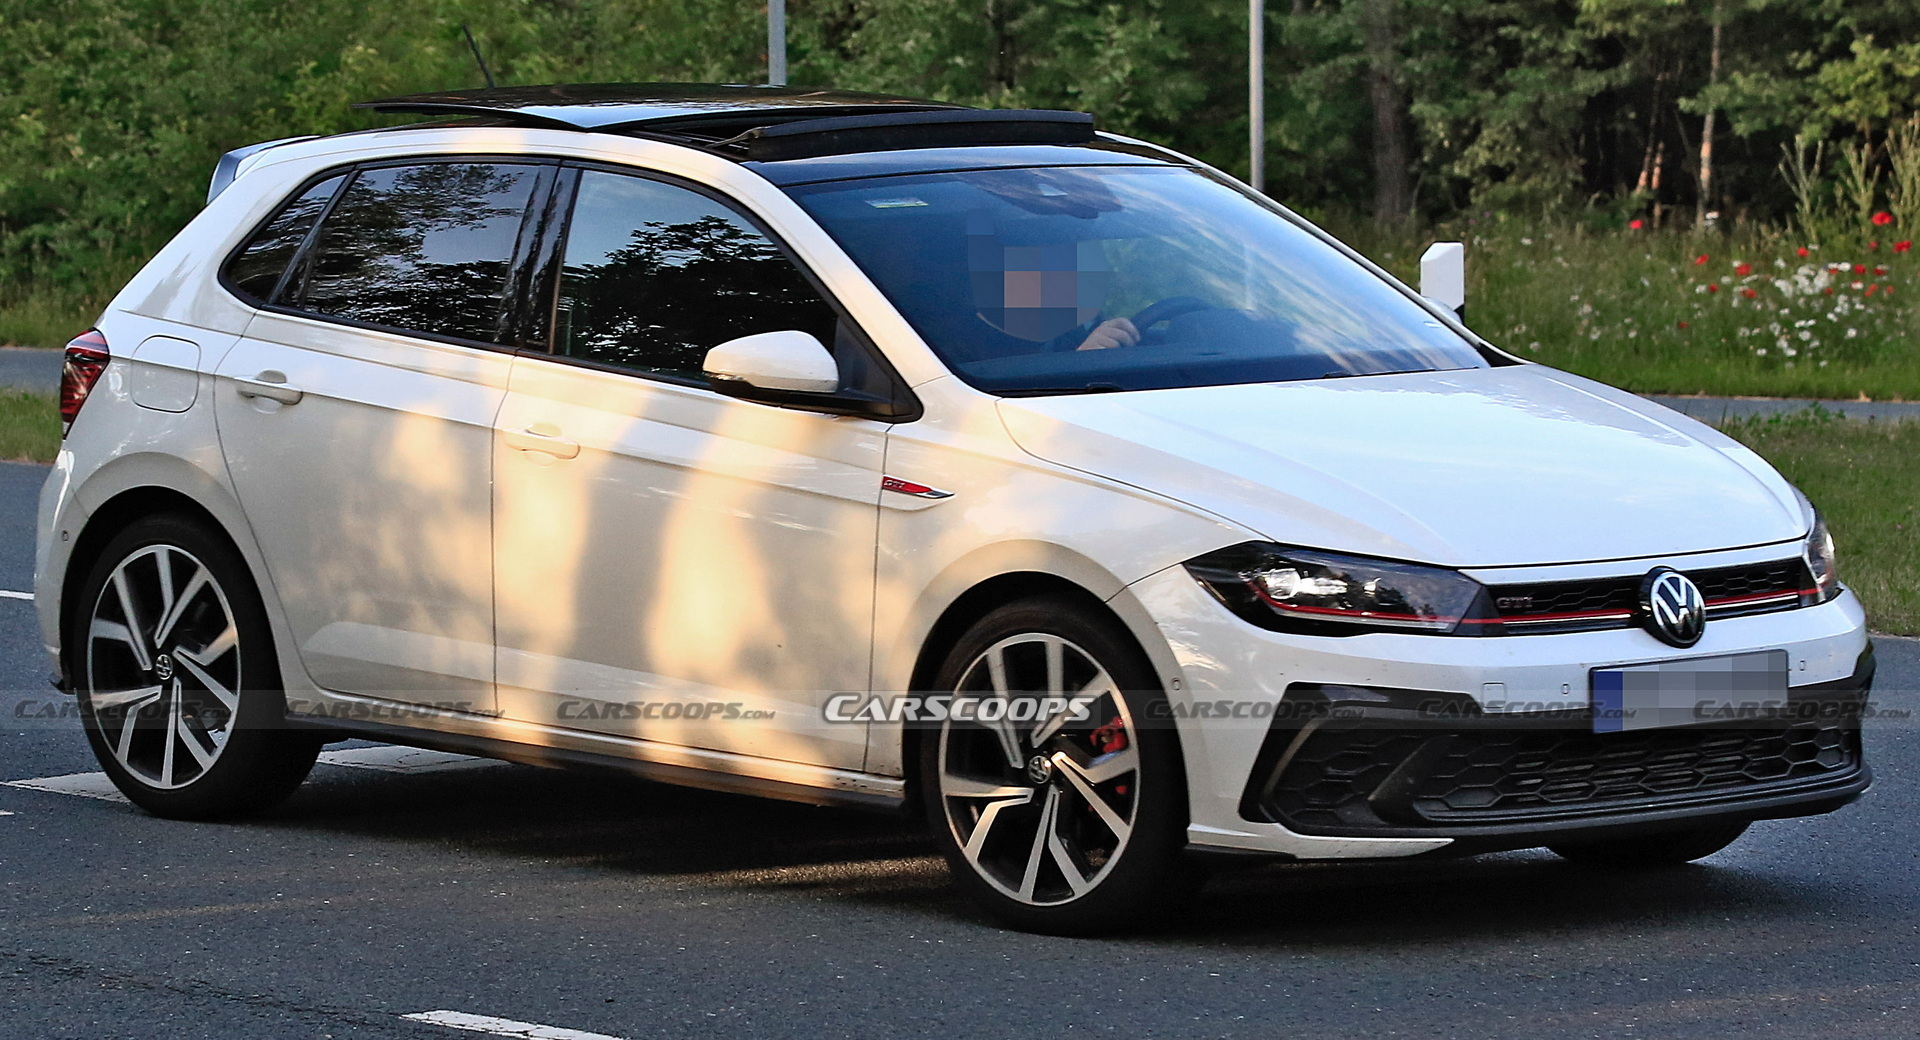 2022 Volkswagen Polo GTI With Almost No Camo Imminent Reveal | Carscoops